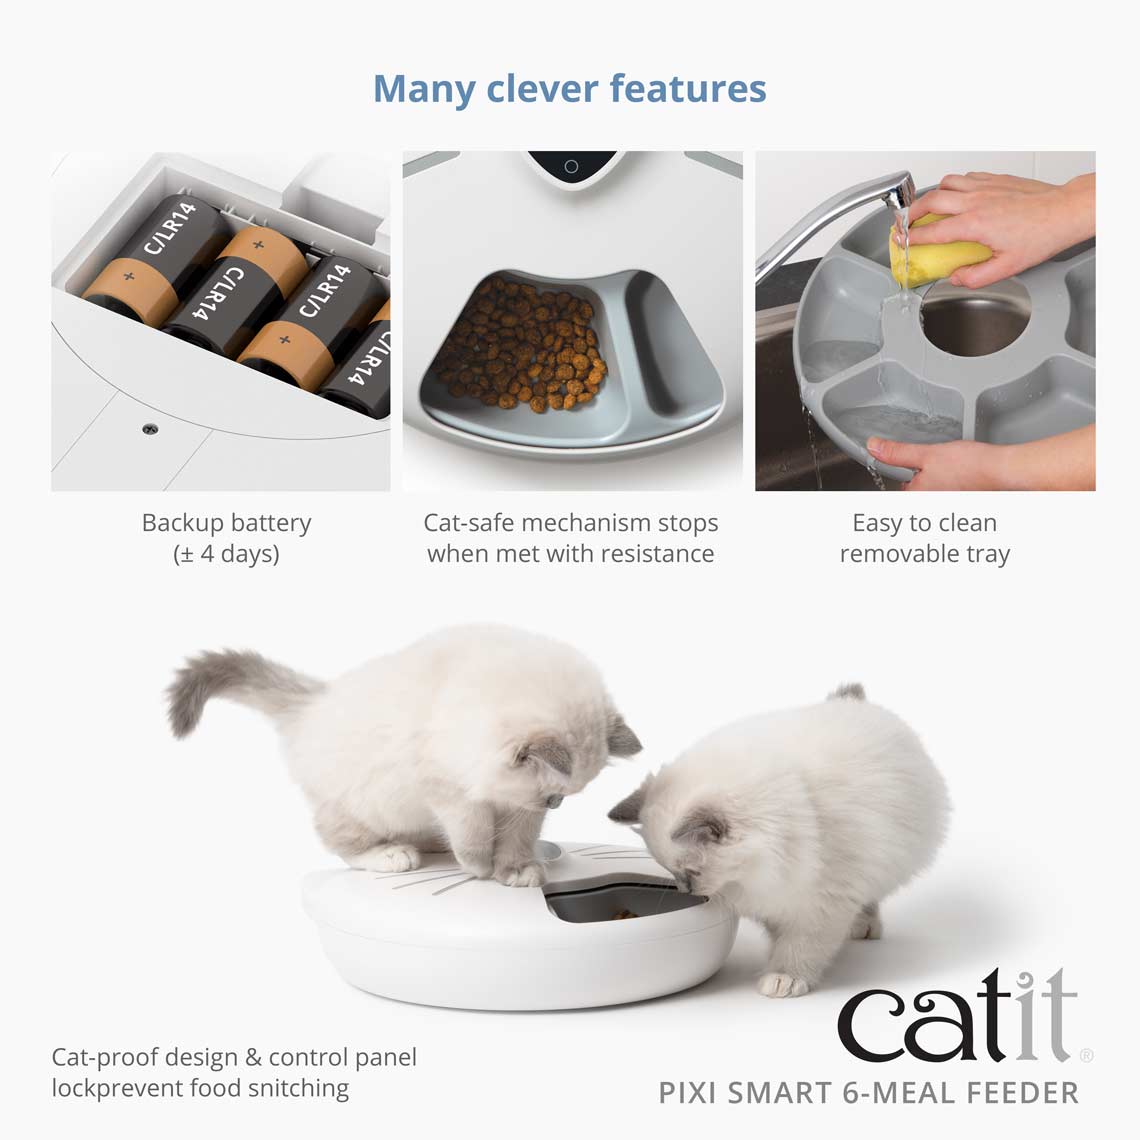 Catit Pixi Smart 6 Meal Feeder Cat Bowl with Bluetooth App